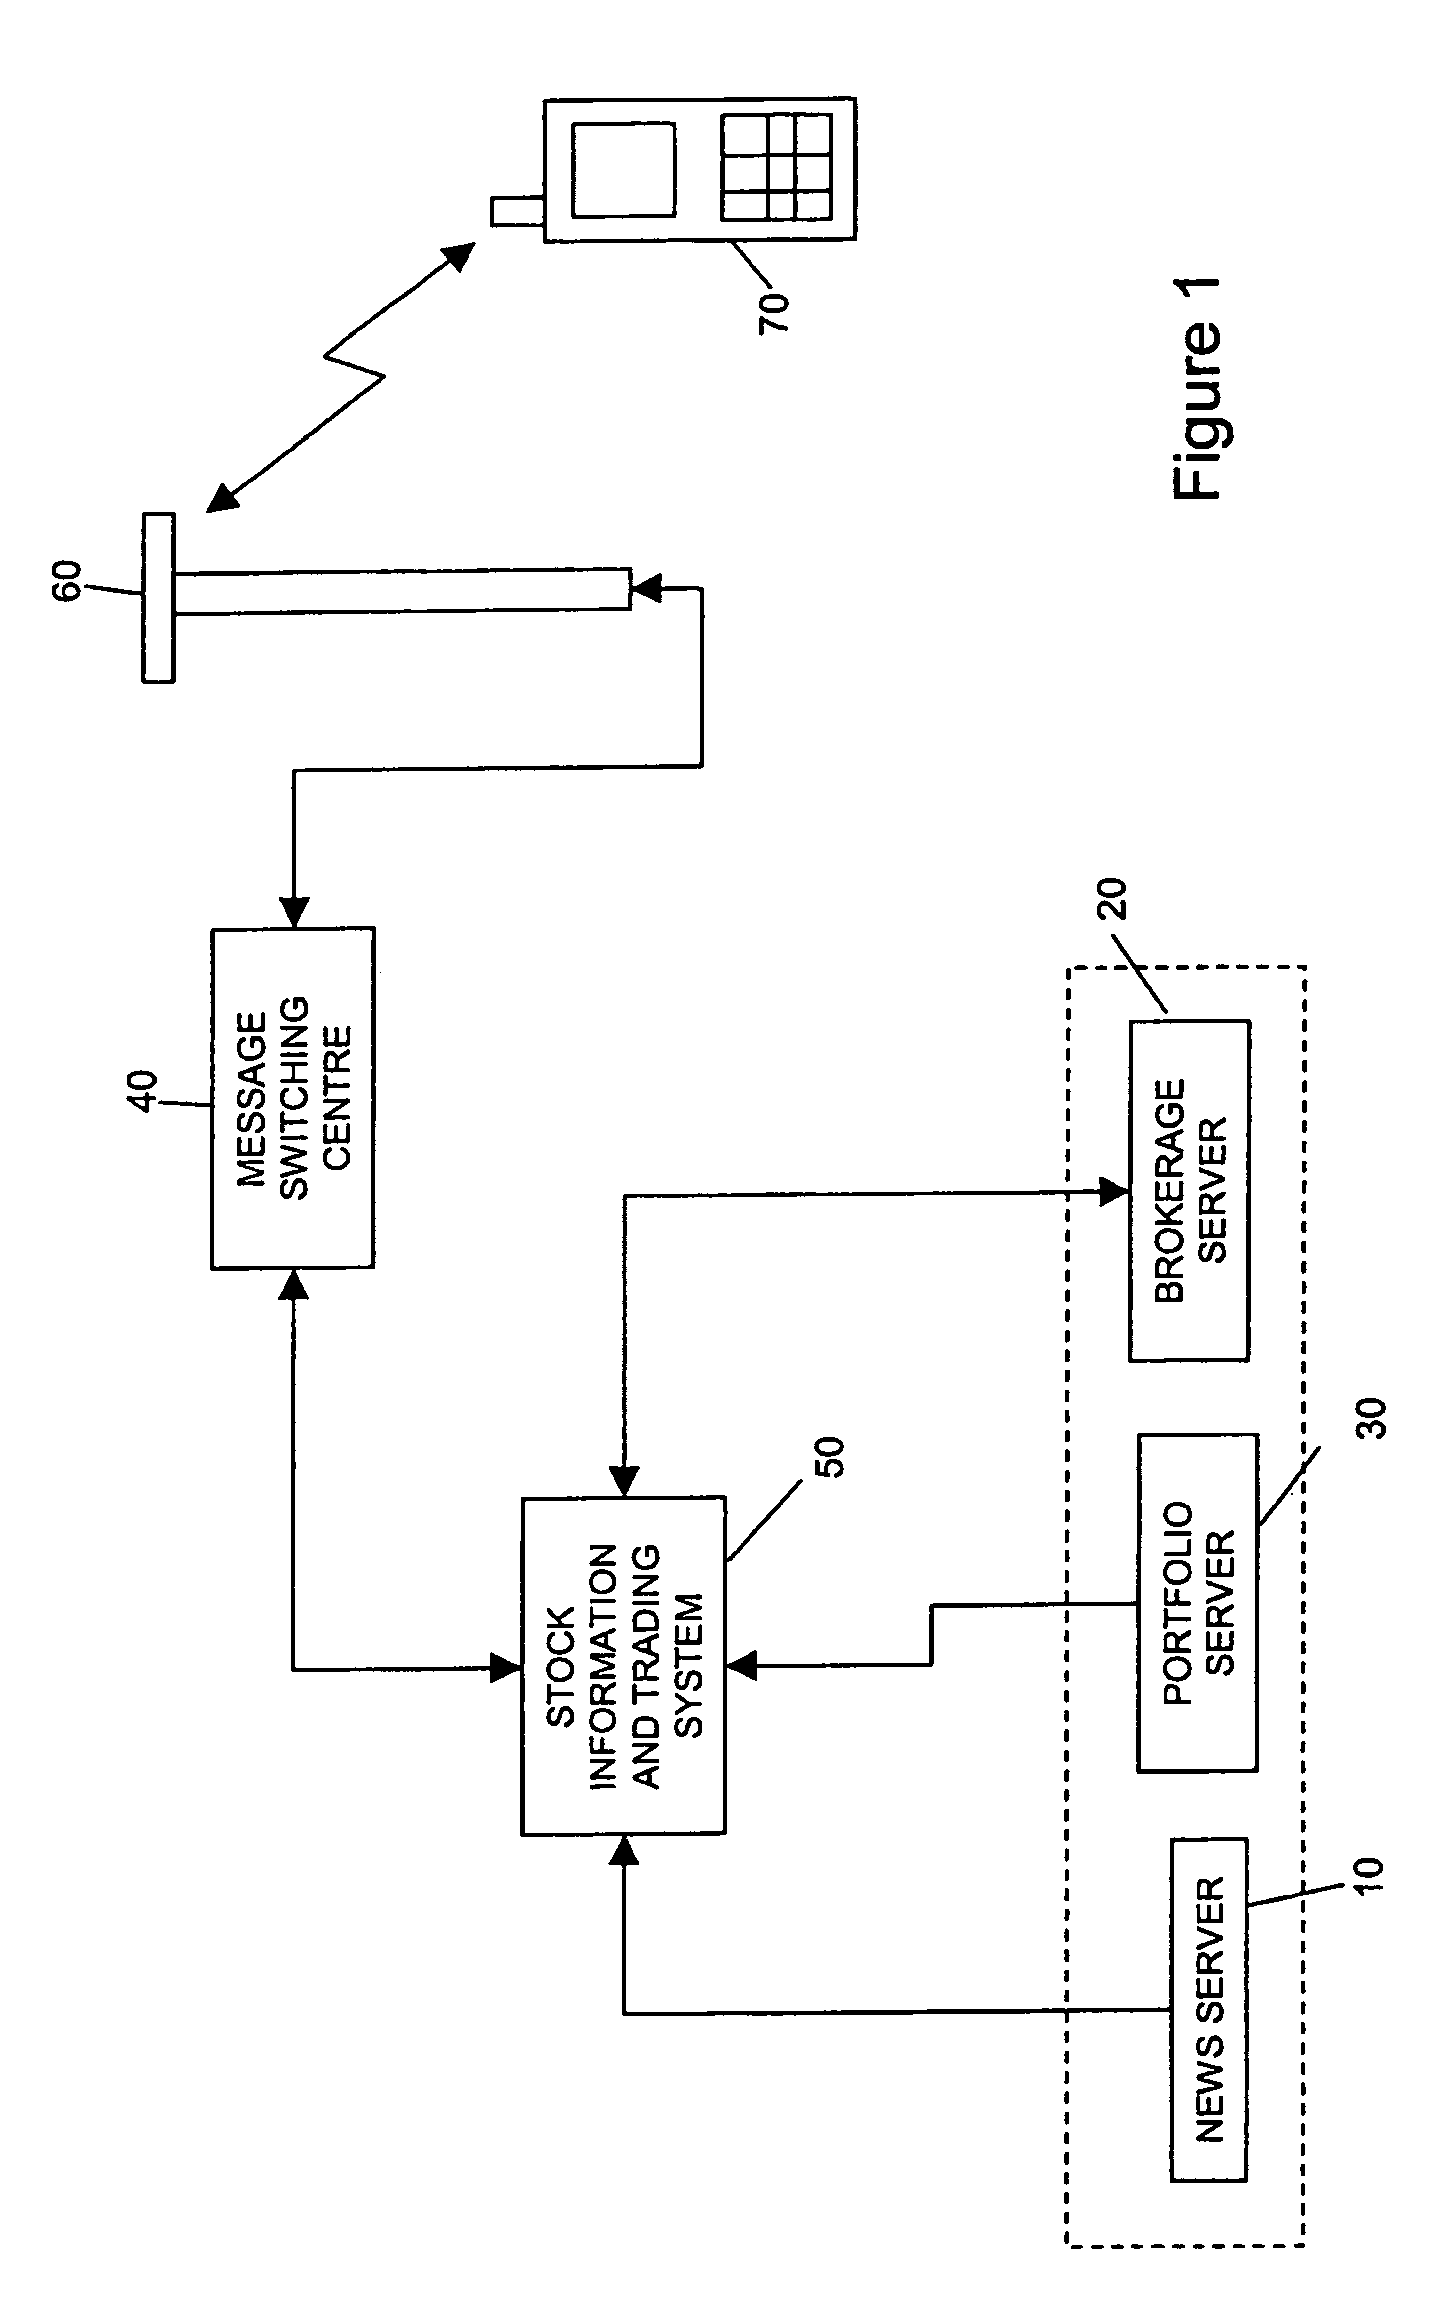 Method and system to enable mobile transactions